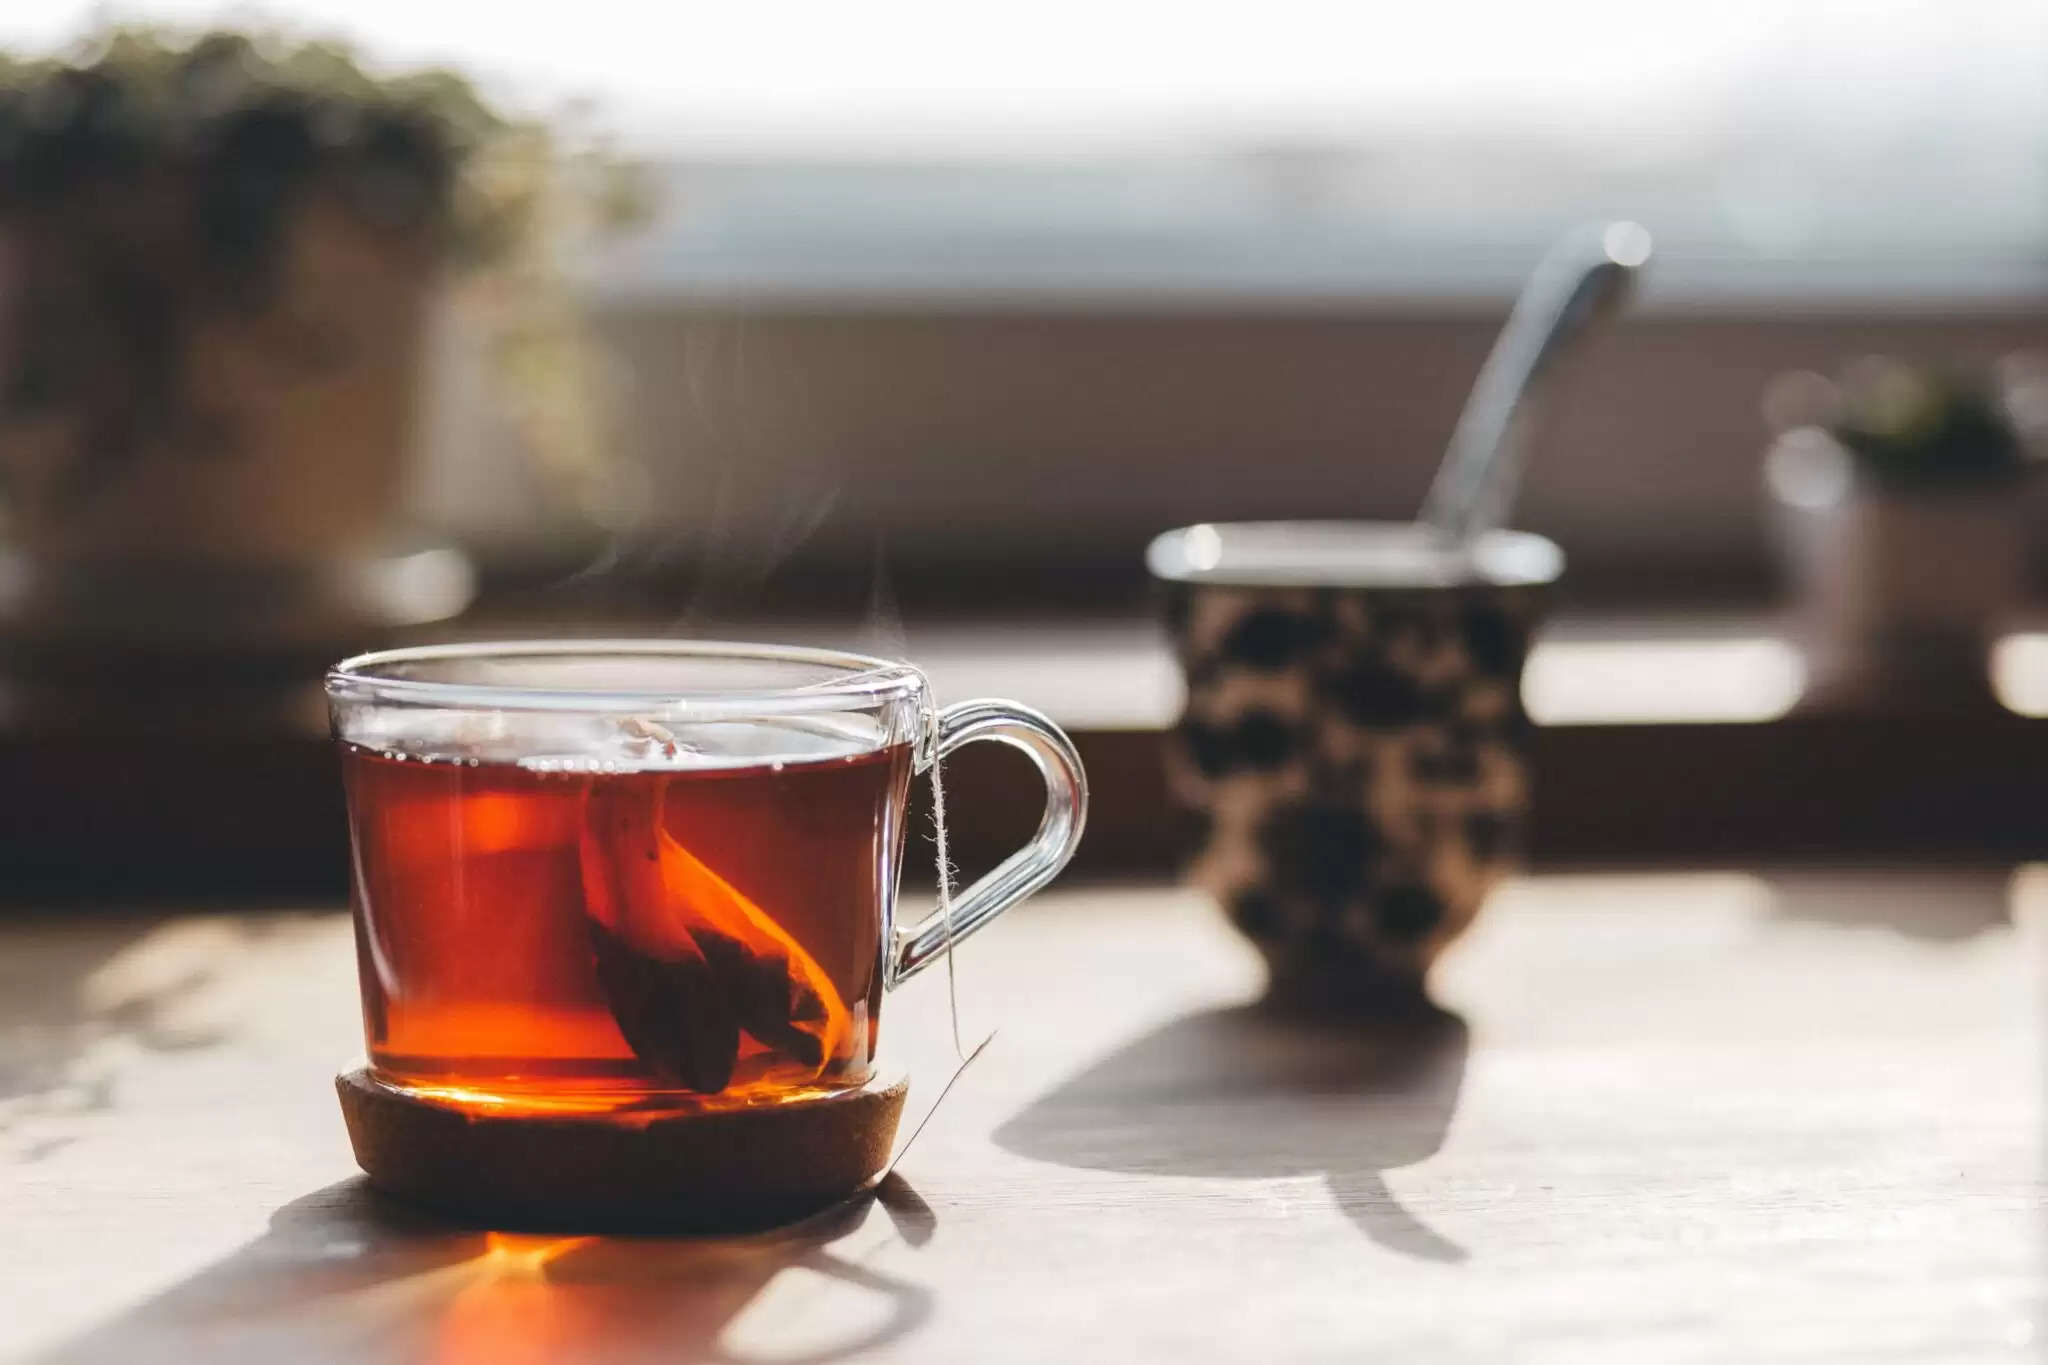 Green Tea vs. Black Tea: Which One Is batter for health?